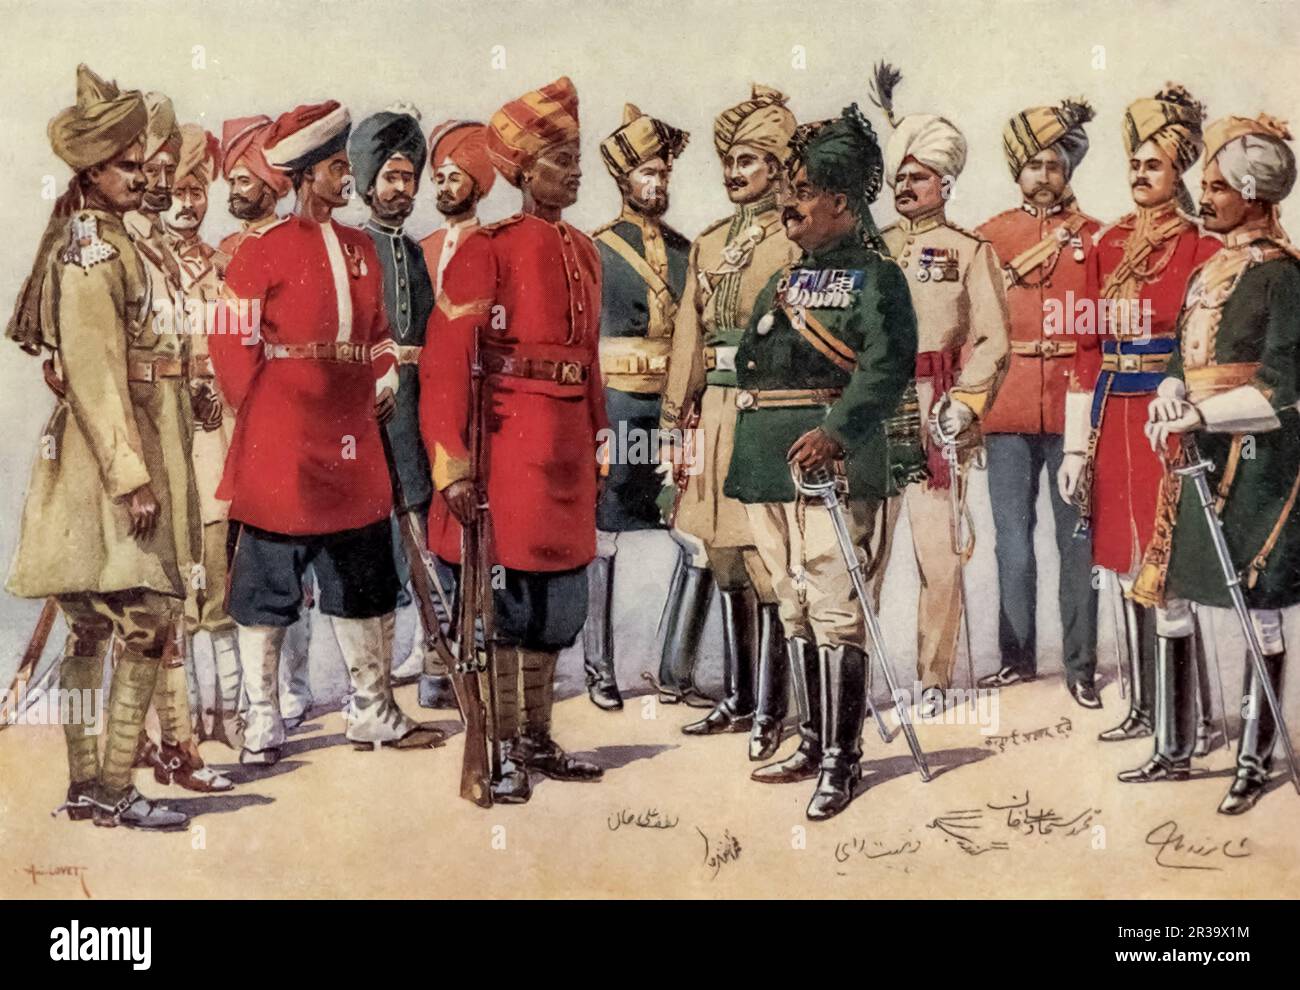 Imperial Service Troops. In front (leftmost) 2nd Gwalior Lancers. Alwar Infantry. Bharatpur Infantry. Jaipur Transport Corps. Second (back) row: Patiala Rajindra Lancers. Kashmir Mountain Battery. Kapurthala Infantry. Jind Infantry. Nabha Infantry (all this infantry - Jat Sikhs). Indore Transport Corps. Bahawalpur Mounted Rifles and Camel Transport. 1st Kashmir Infantry. Sirmoor Sapprs. Rampur Lancers. 1st Hyderabad Lancers. painted by Major Alfred Crowdy Lovett, (1862-1919) from the book ' The armies of India ' by Major George Fletcher MacMunn, (1869-1952) Publication date 1911 Publisher Lond Stock Photo